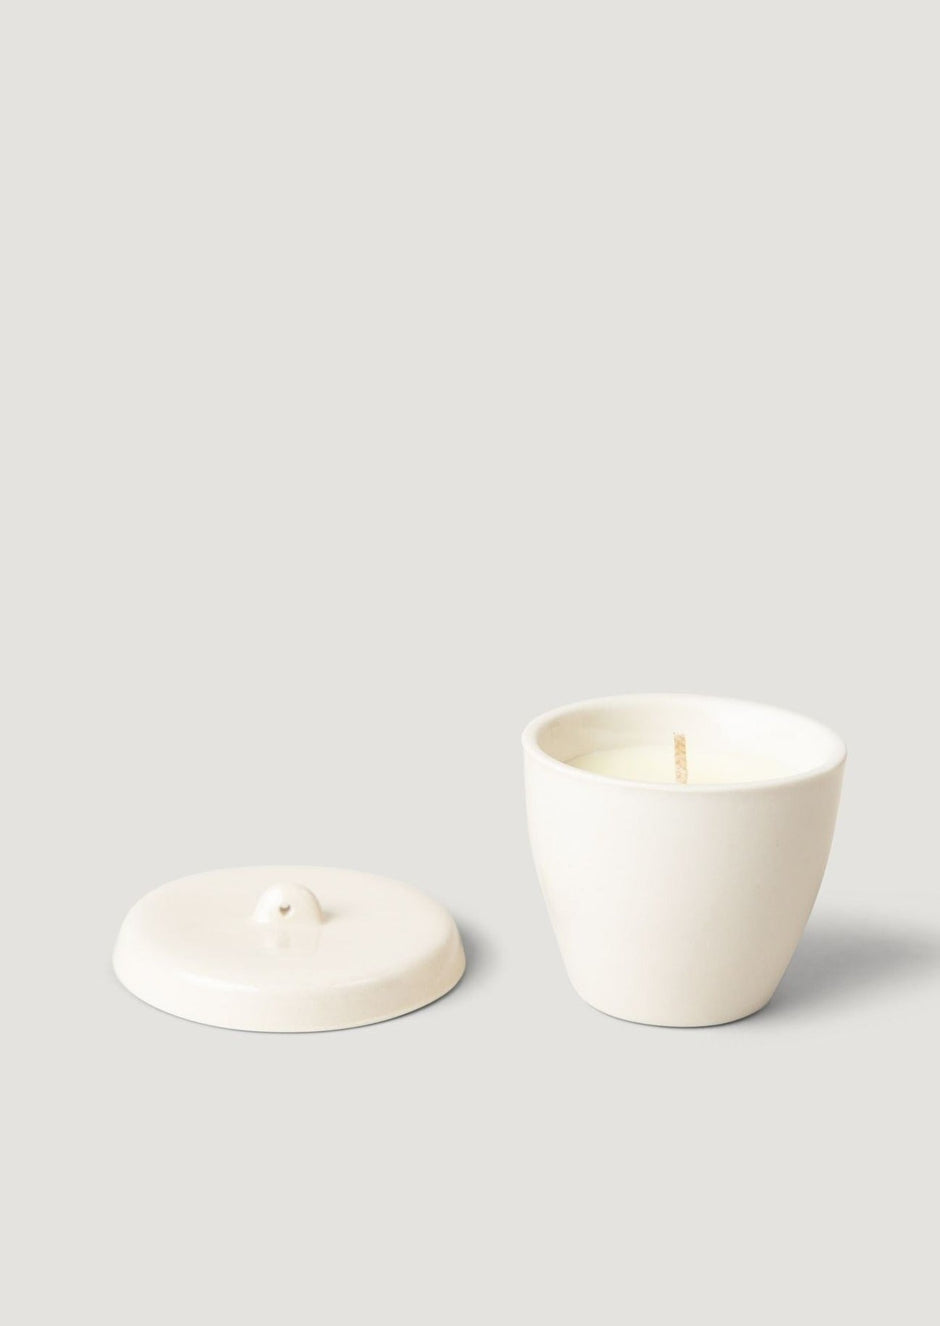 Seasonal Accents | Candles and Candleholders at Afloral.com